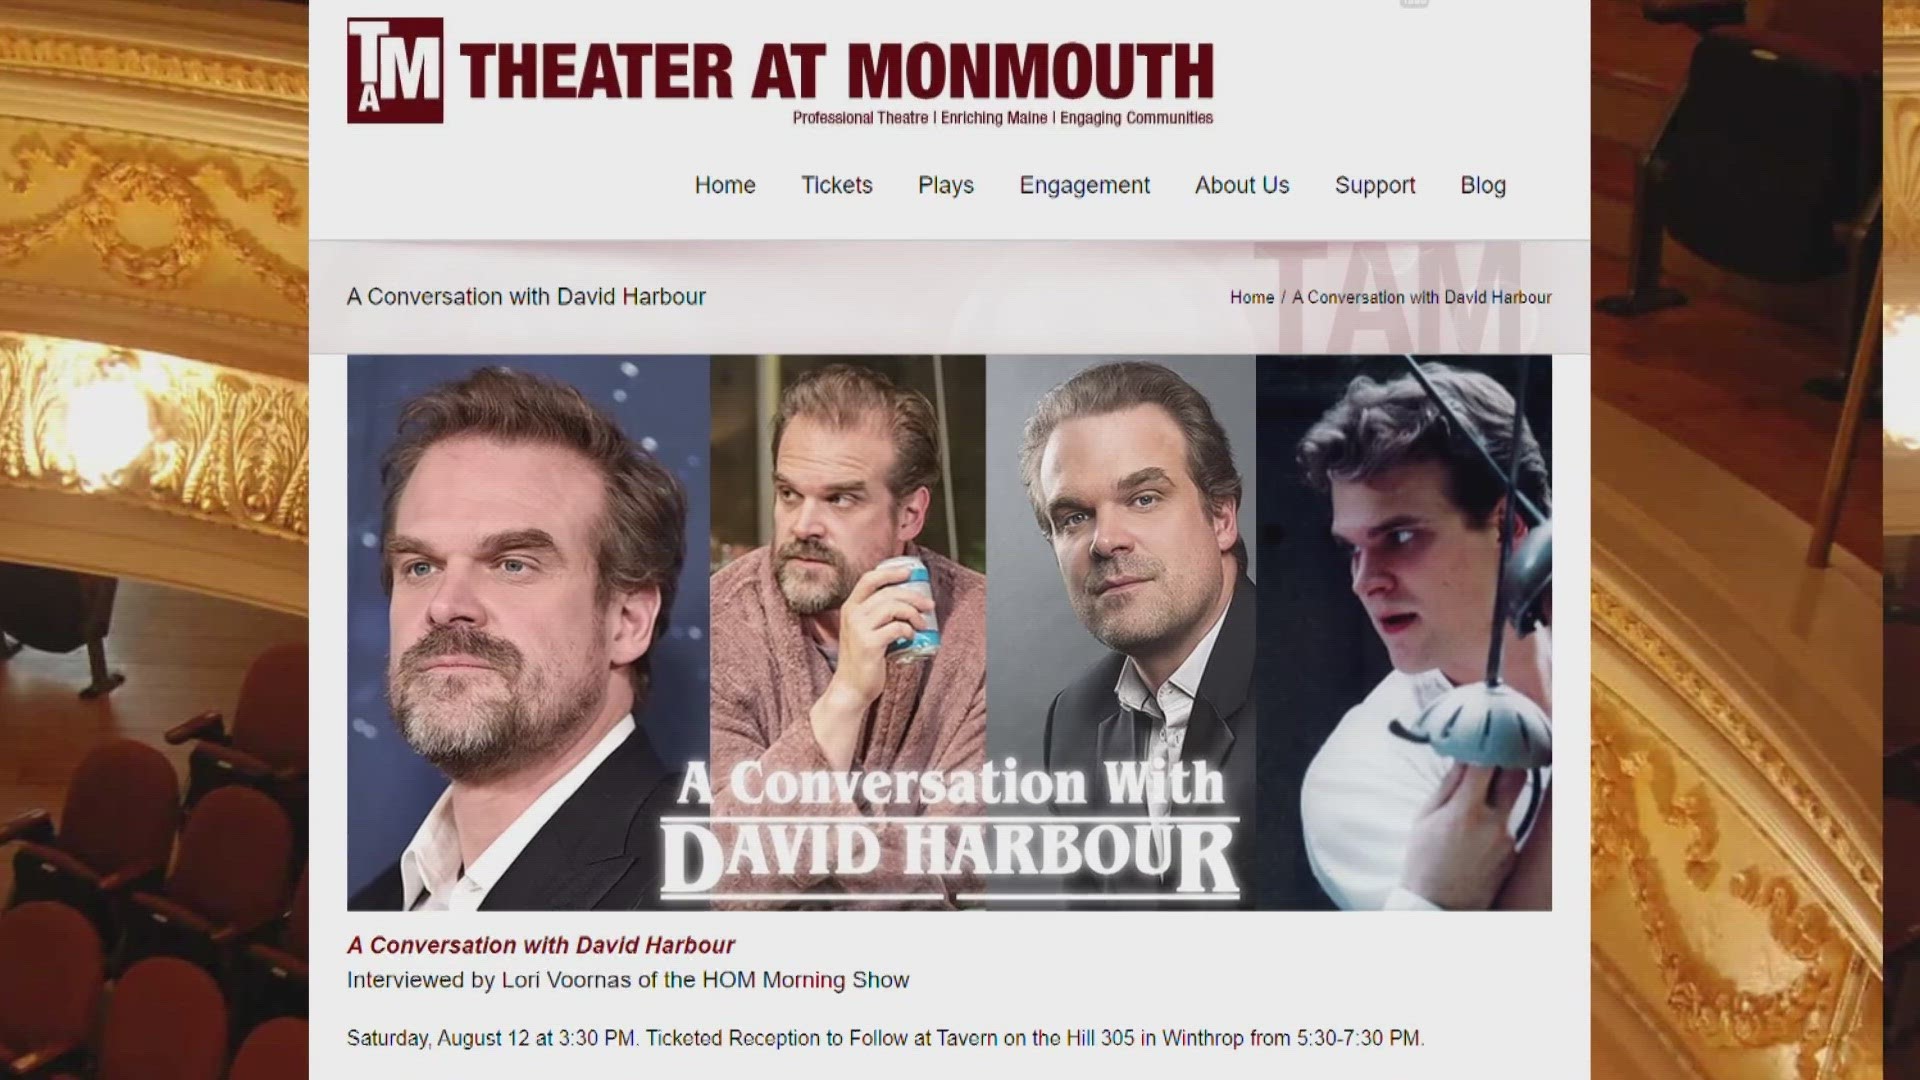 The Theater at Monmouth is beloved by its community and by "Stranger Things" actor David Harbour, who jumpstarted his acting career on stage in the 1990s.